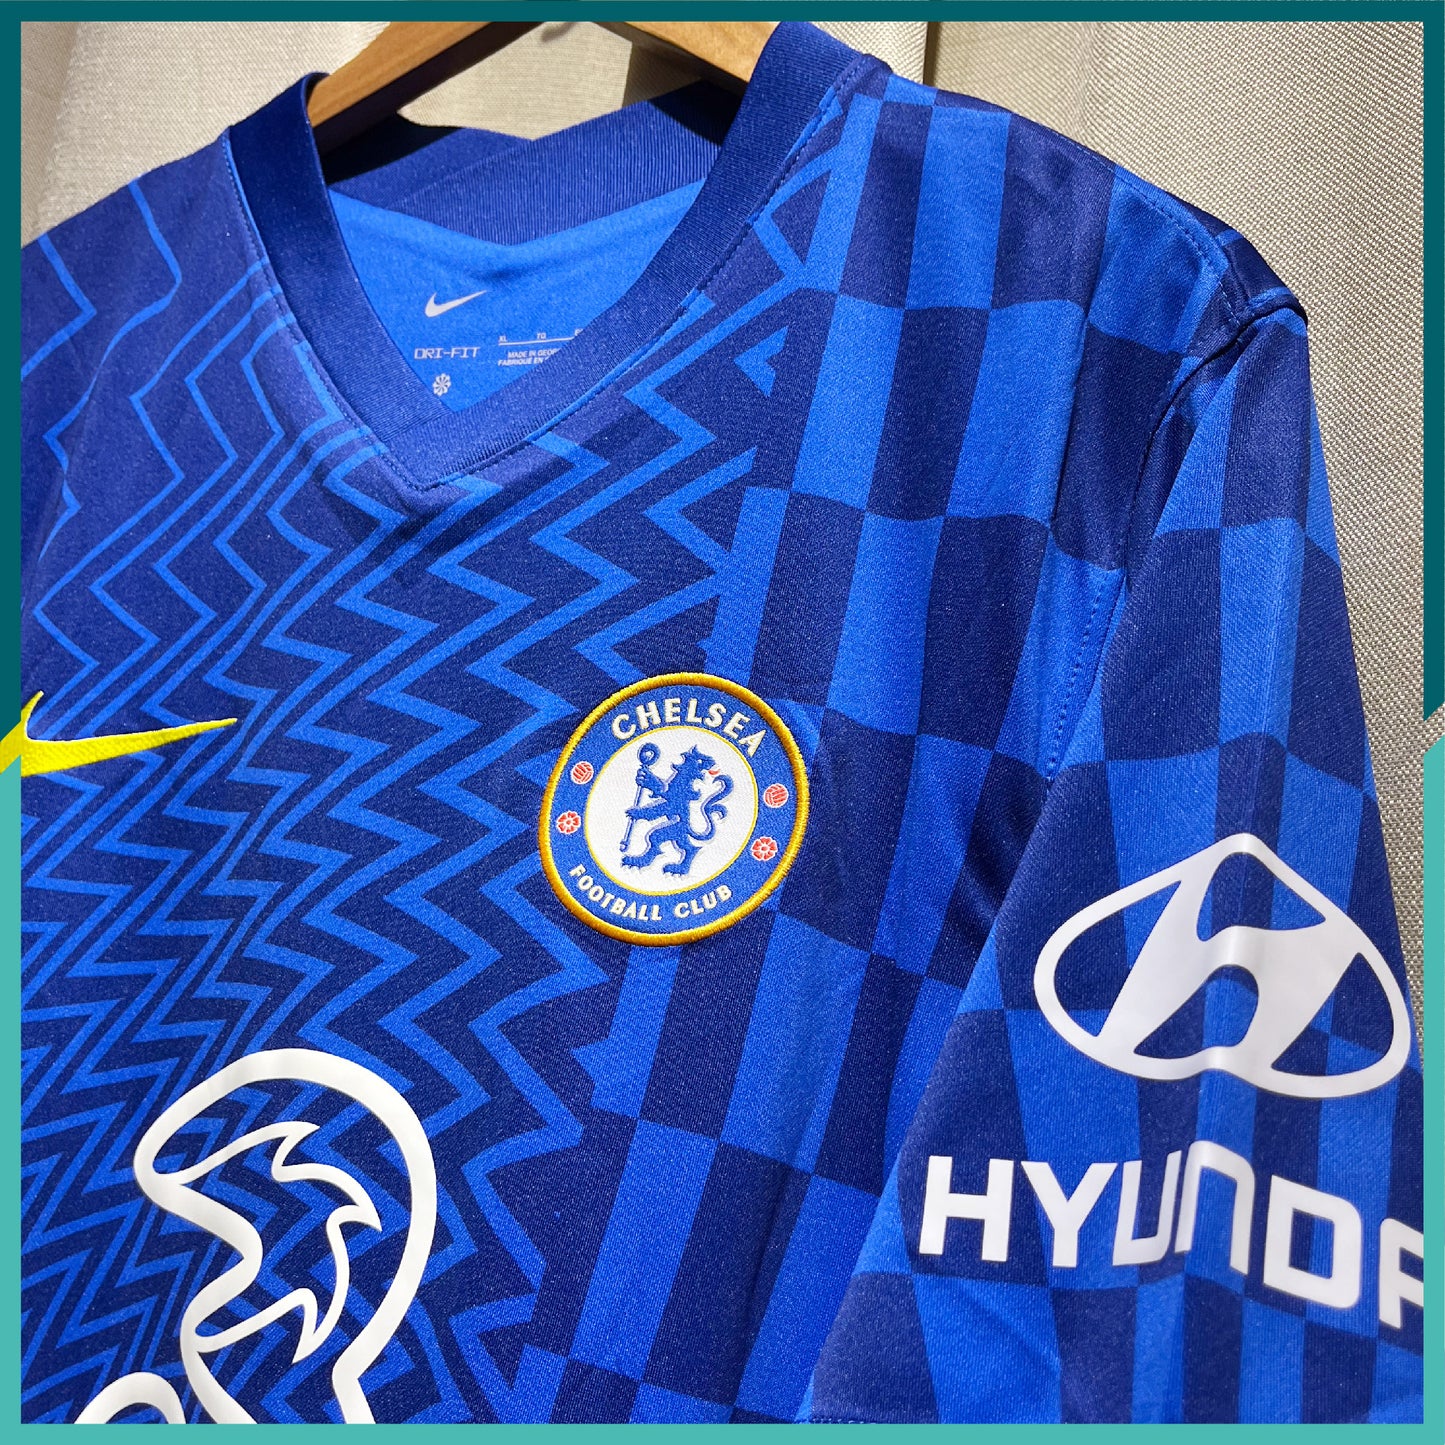 [Nameset & Patches Included] 2021-22 Chelsea Home Jersey